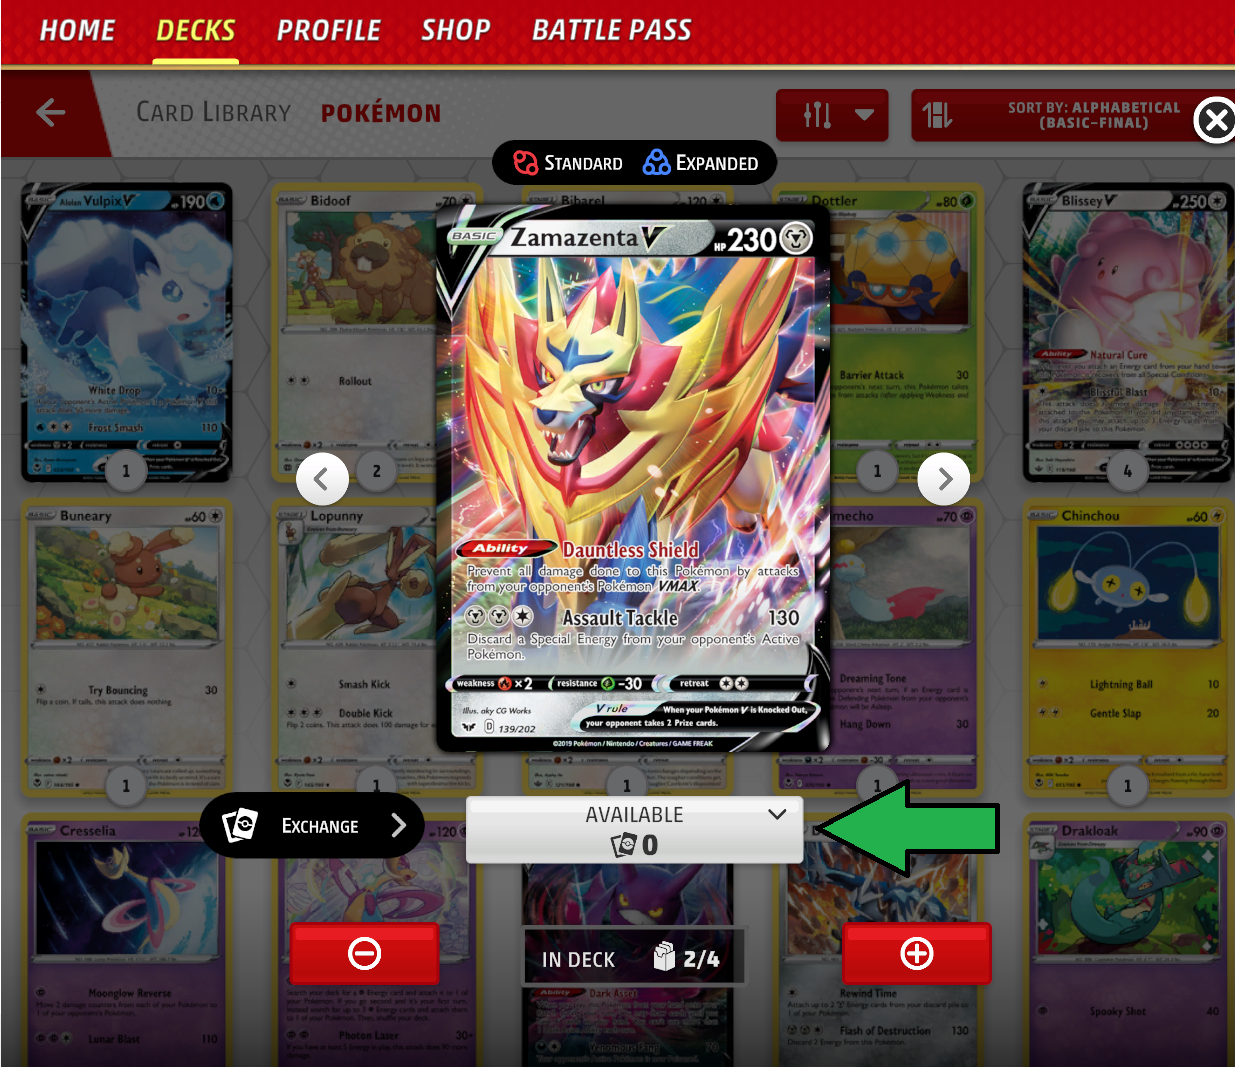 screenshot of the card UI shows an arrow pointing to the available button.